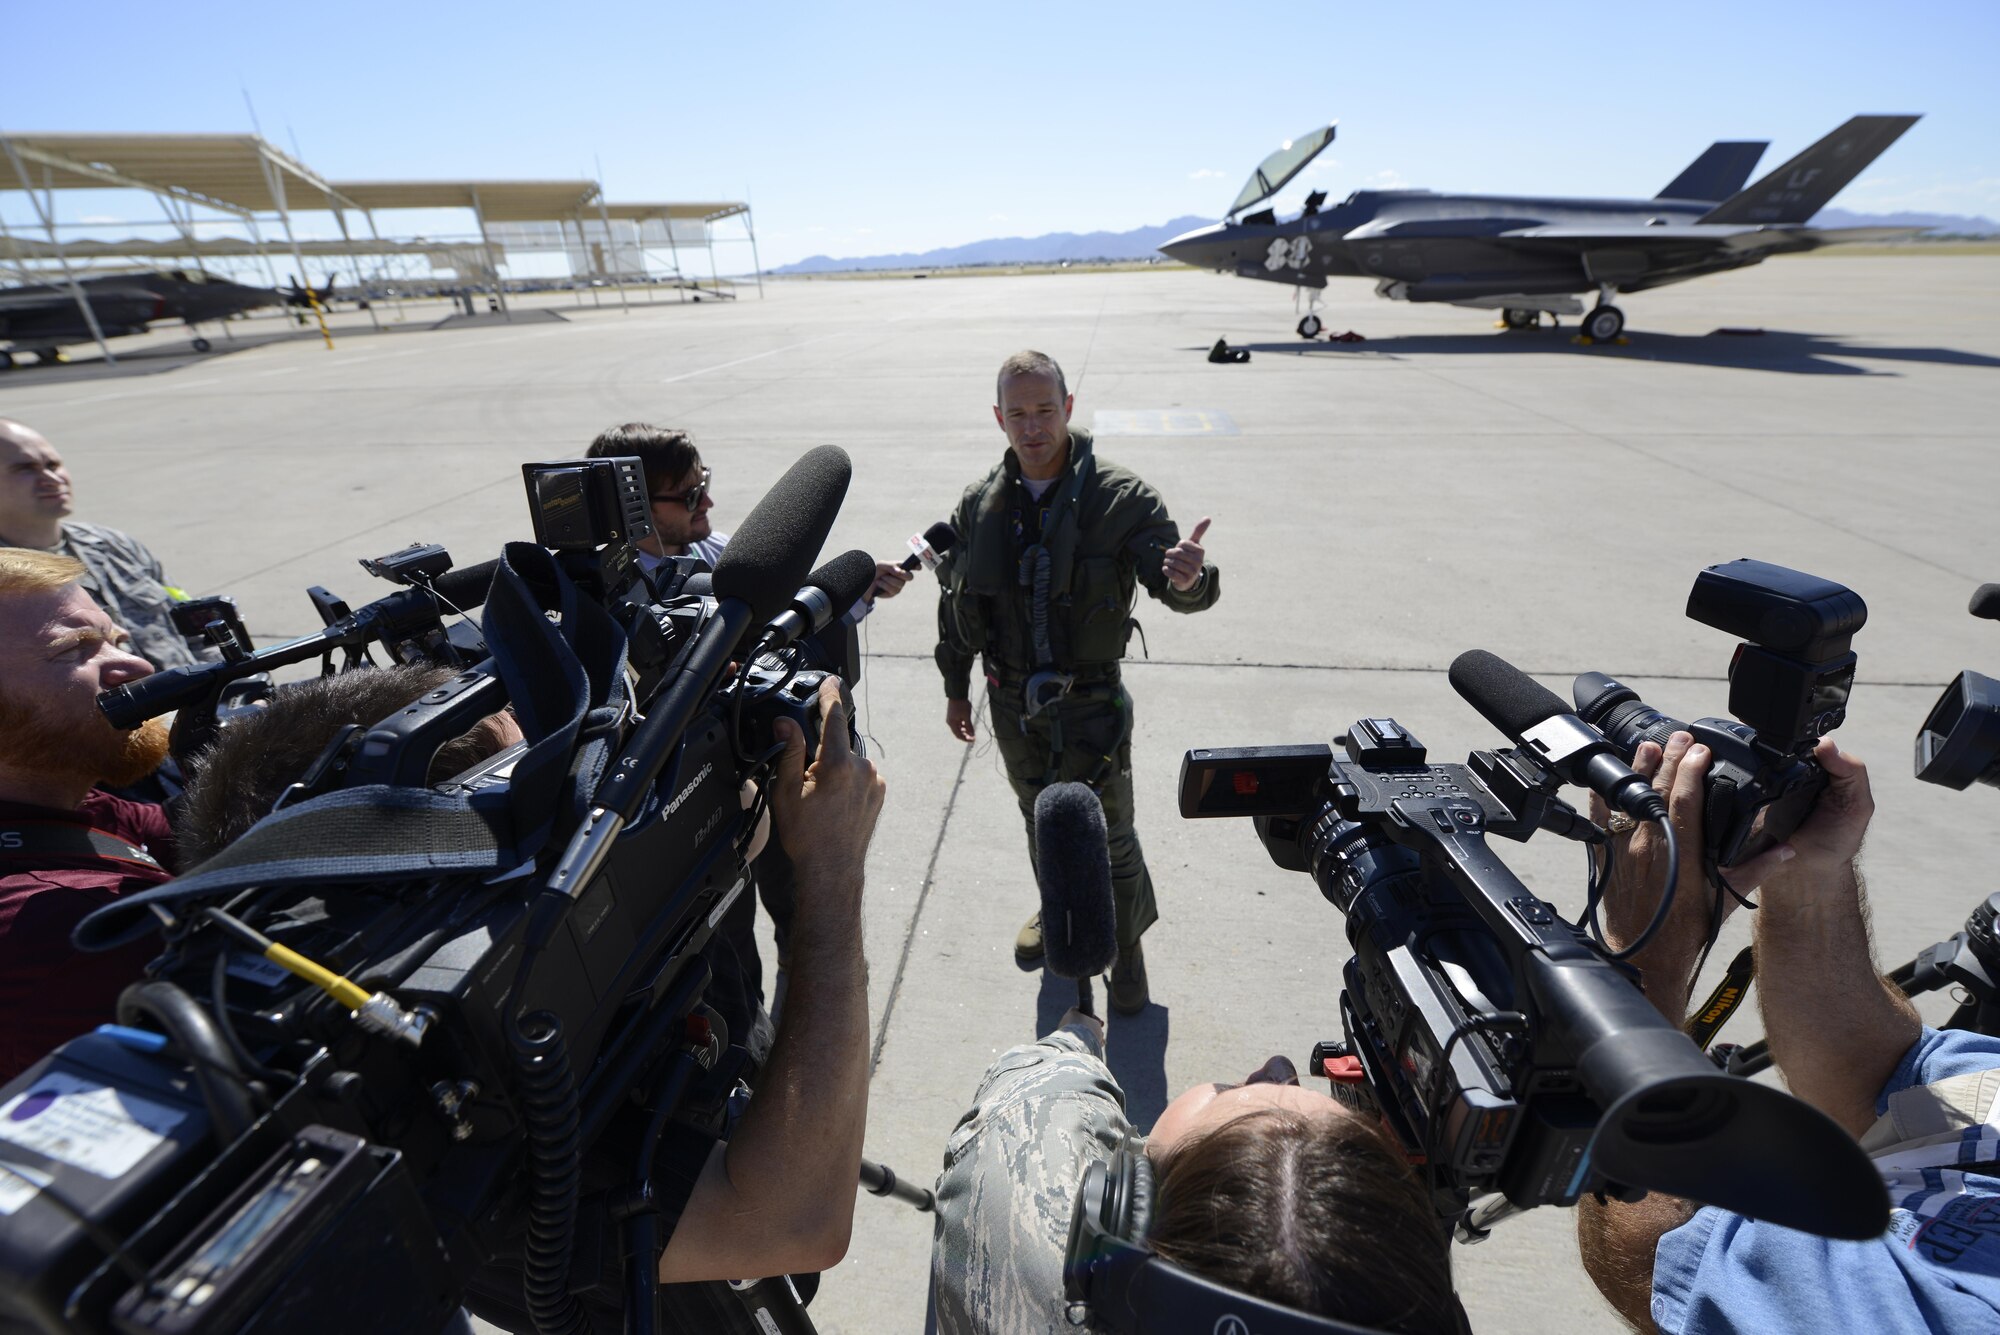 Brig. Gen. Scott Pleus, the 56th Fighter Wing commander, speaks with U.K. and Arizona-based media outlets after landing the flagship F-35 Lightning ll at Luke Air Force Base, Ariz., April 28, 2015. The flagship's arrival coincides with the start of Luke’s F-35 student pilot training, which begins in May. Luke now has 20 U.S. F-35s and two from the Royal Australian Air Force. (U.S. Air Force photo/Senior Airman Devante Williams)